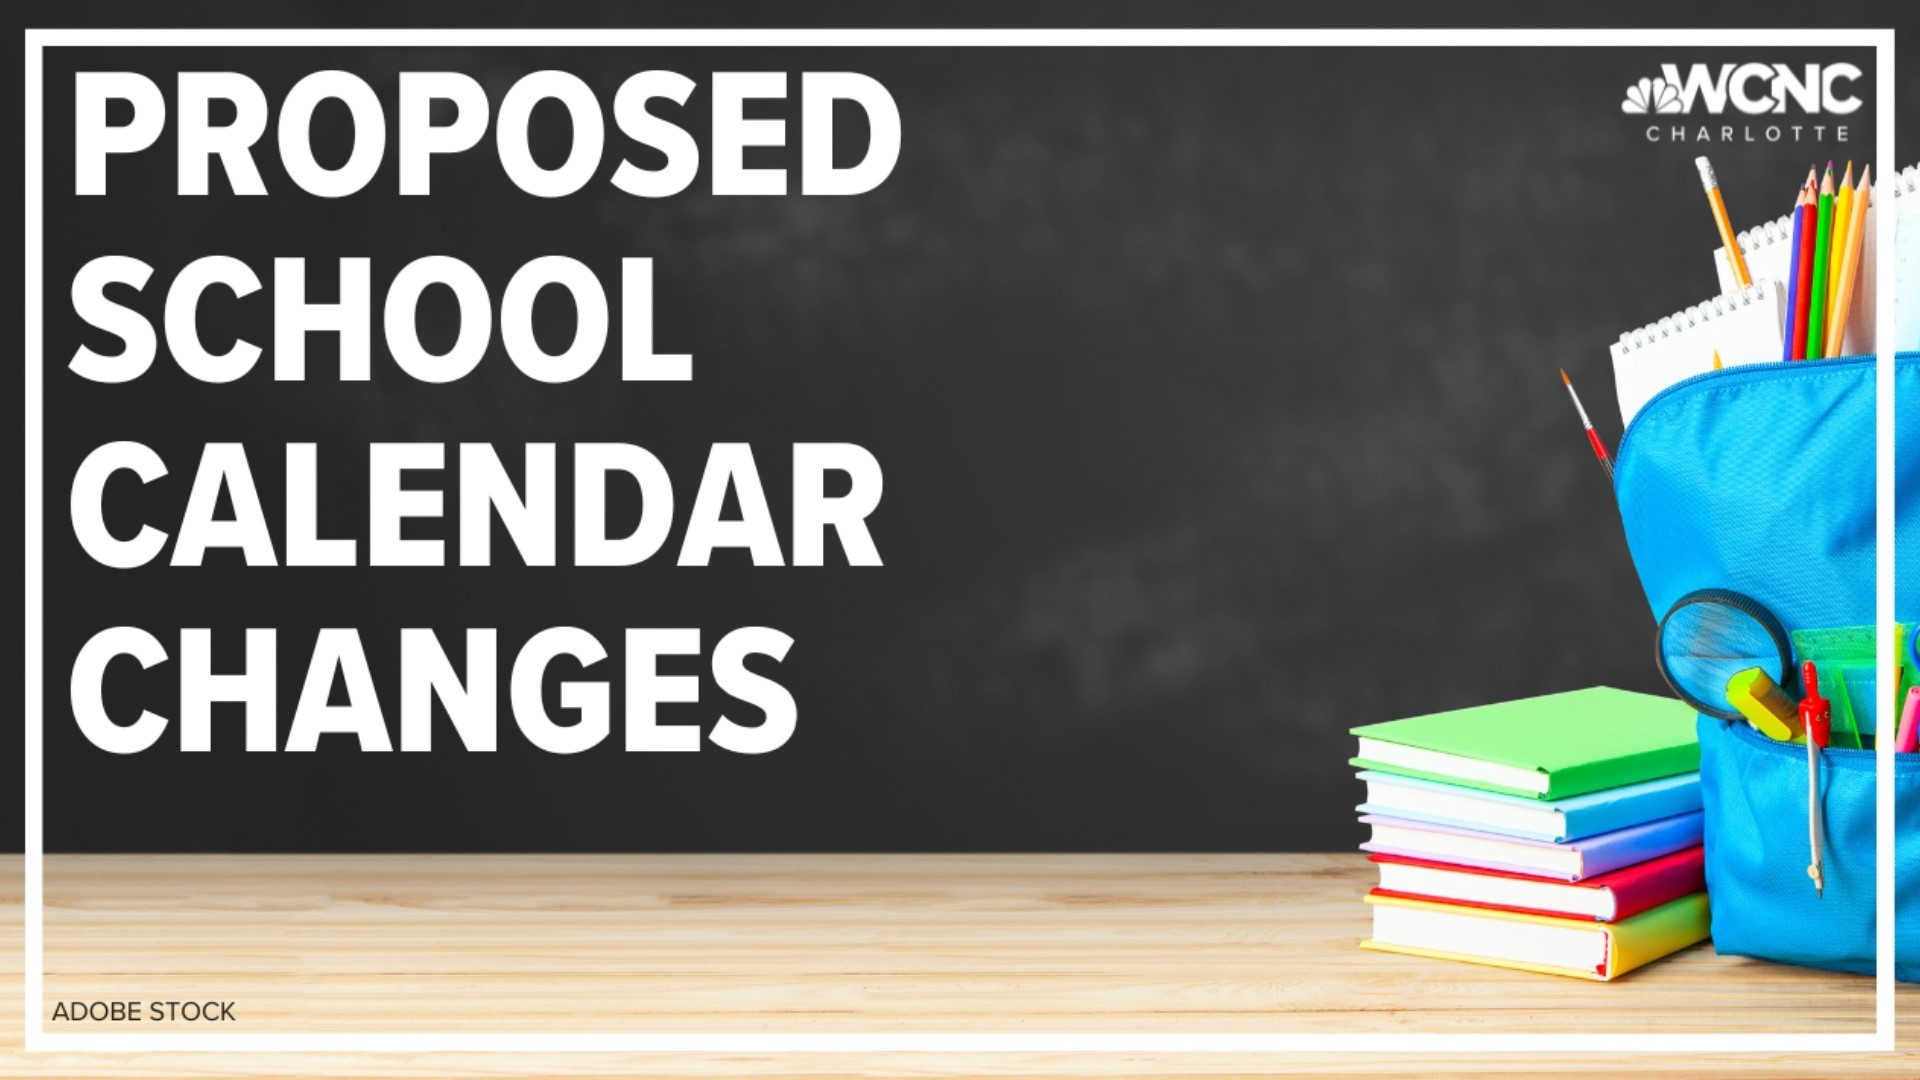 The district is considering voting on a modified year-round school calendar for the 2025 school year.